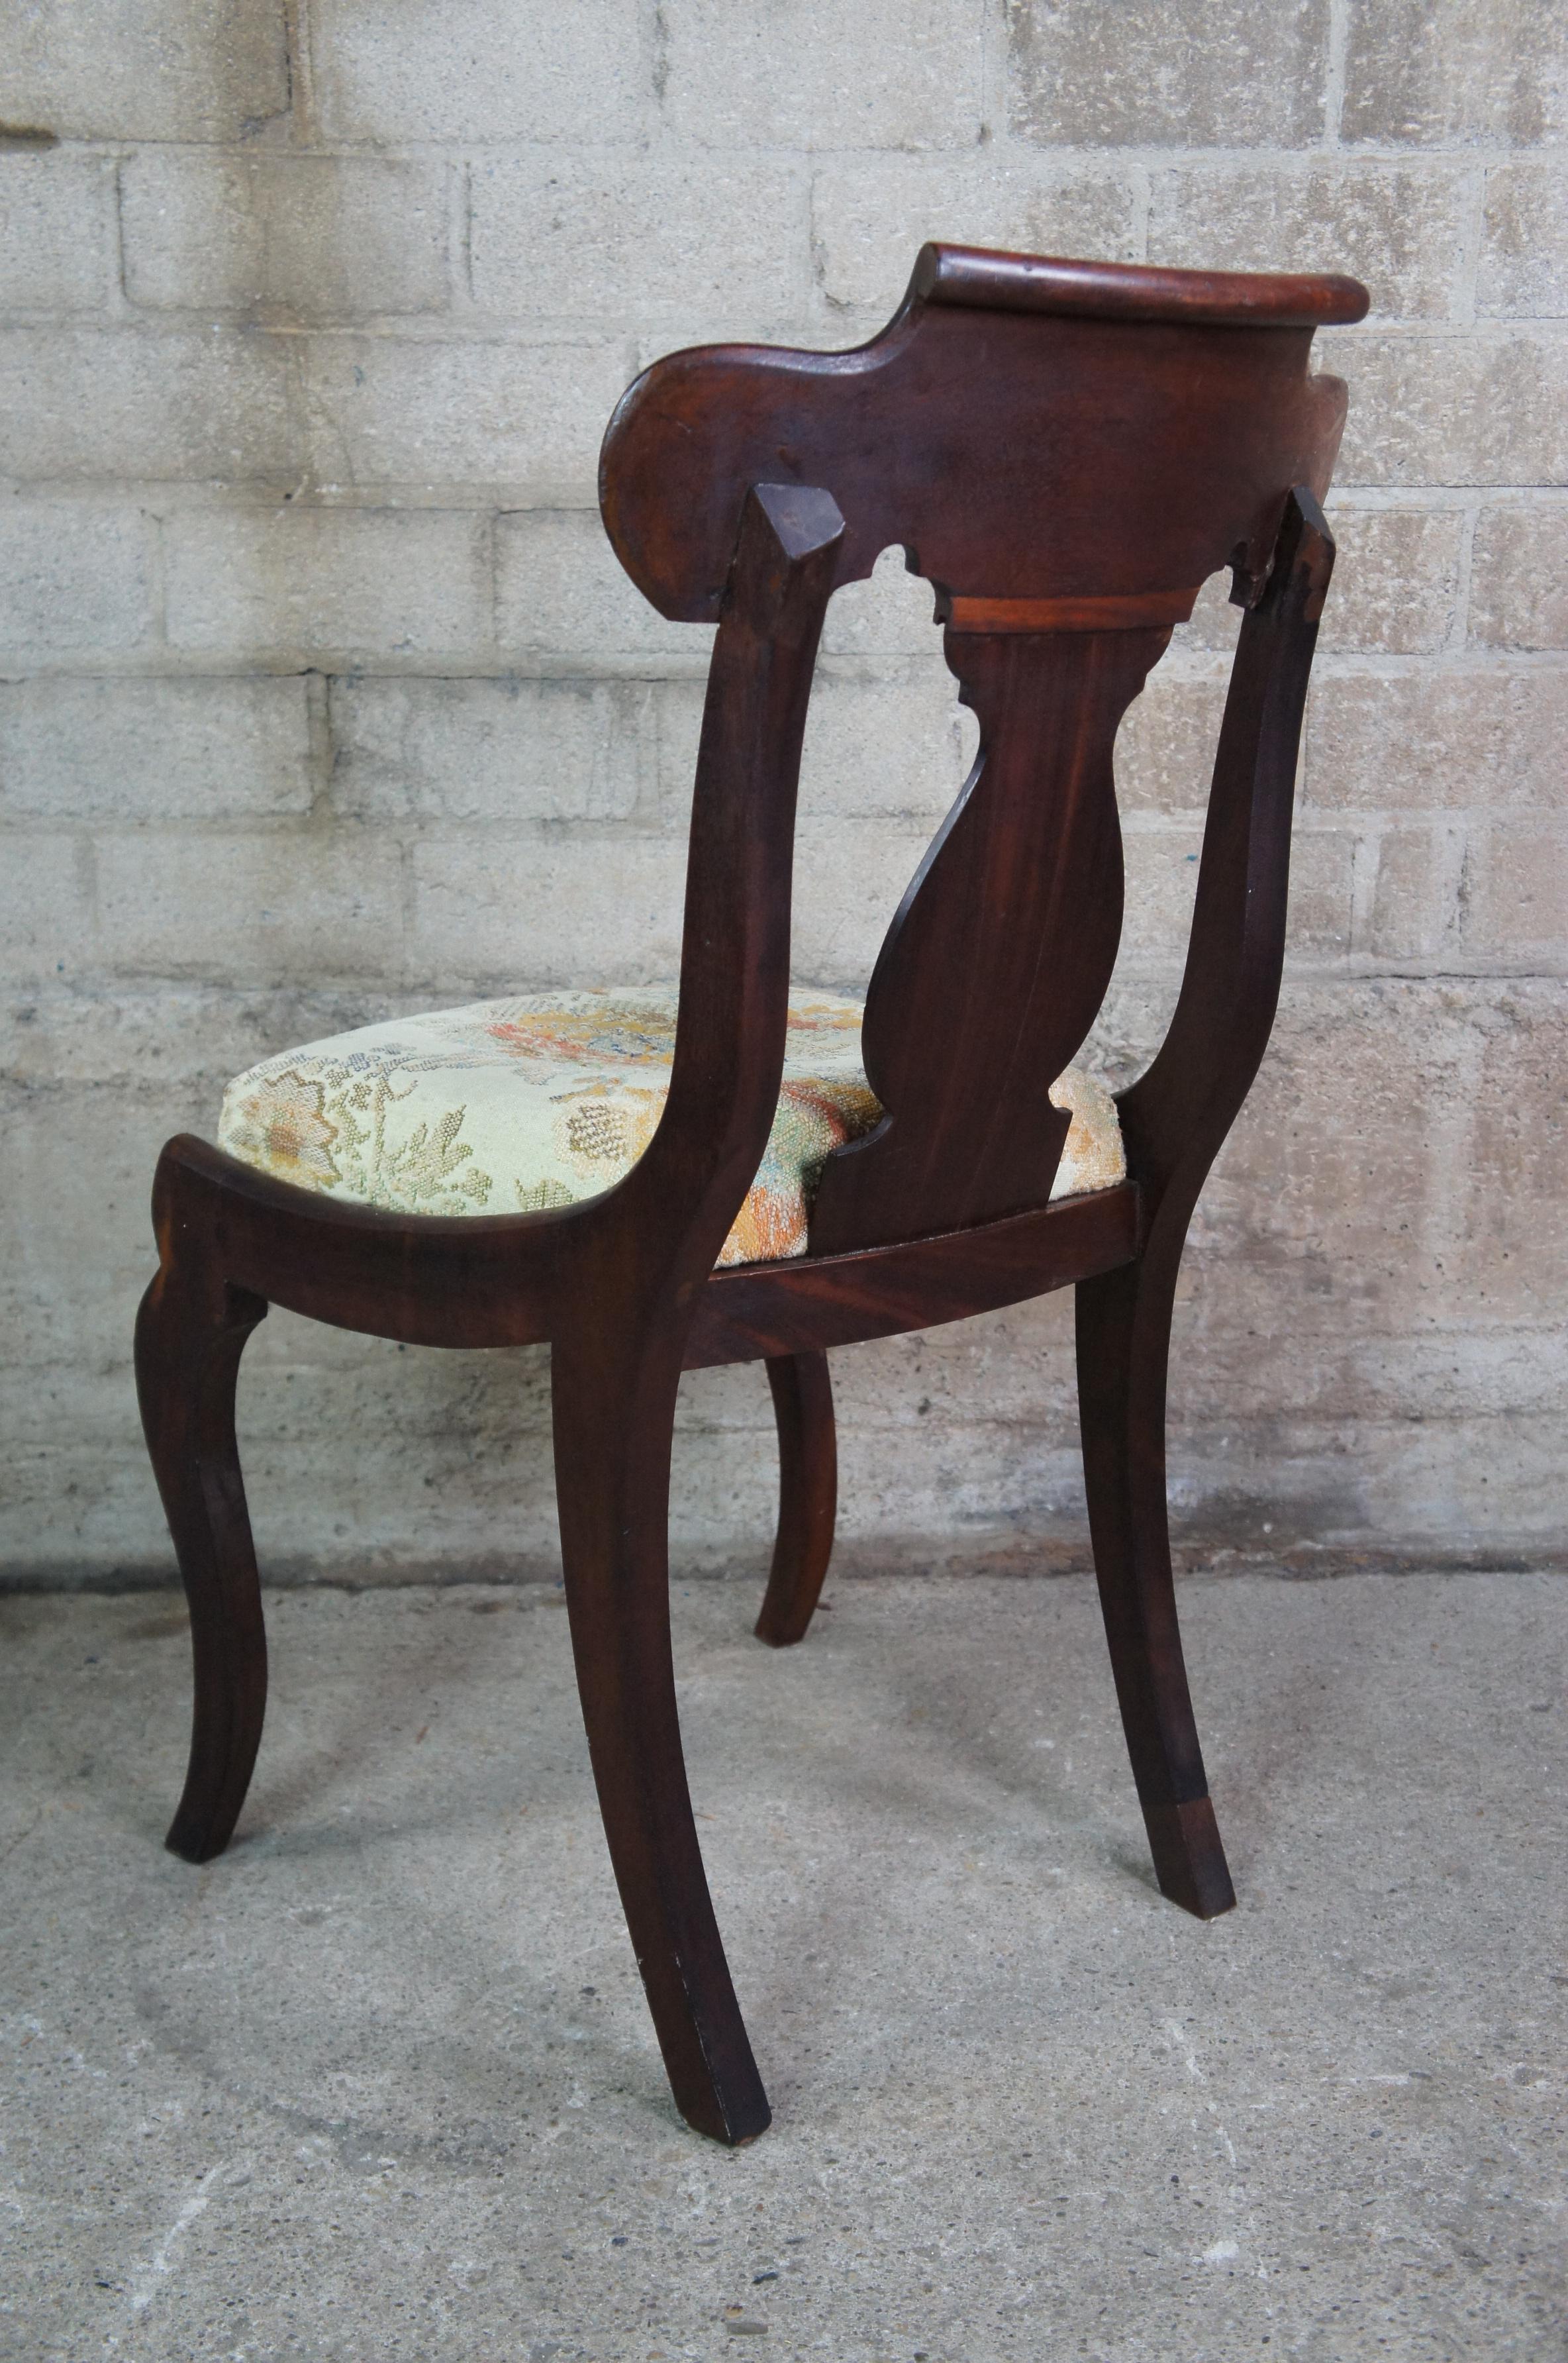 Antique 19th Century American Empire Flame Mahogany Parlor Vanity Dining Chair For Sale 3